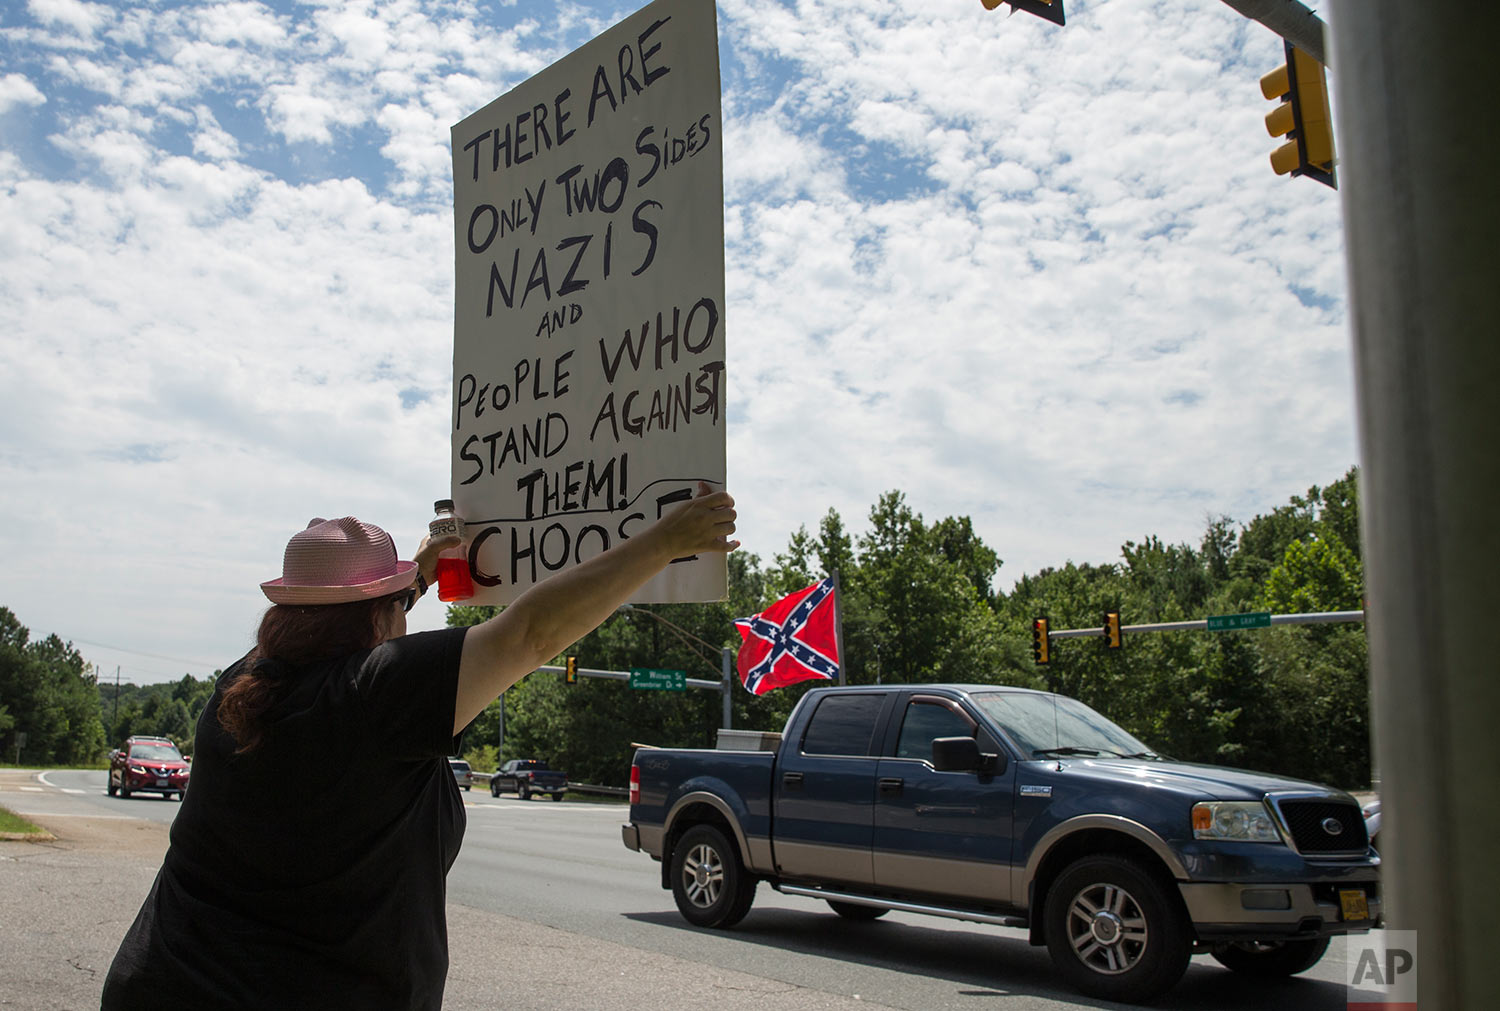  Kim Wyman of Spotsylvania, Va.,  joined more than 60 demonstrators at the intersection of the Blue and Gray Parkway and William Street in Fredericksburg, Va., Sunday, Aug. 13, 2017, to protest against hate and racism in the wake of violence in Charl